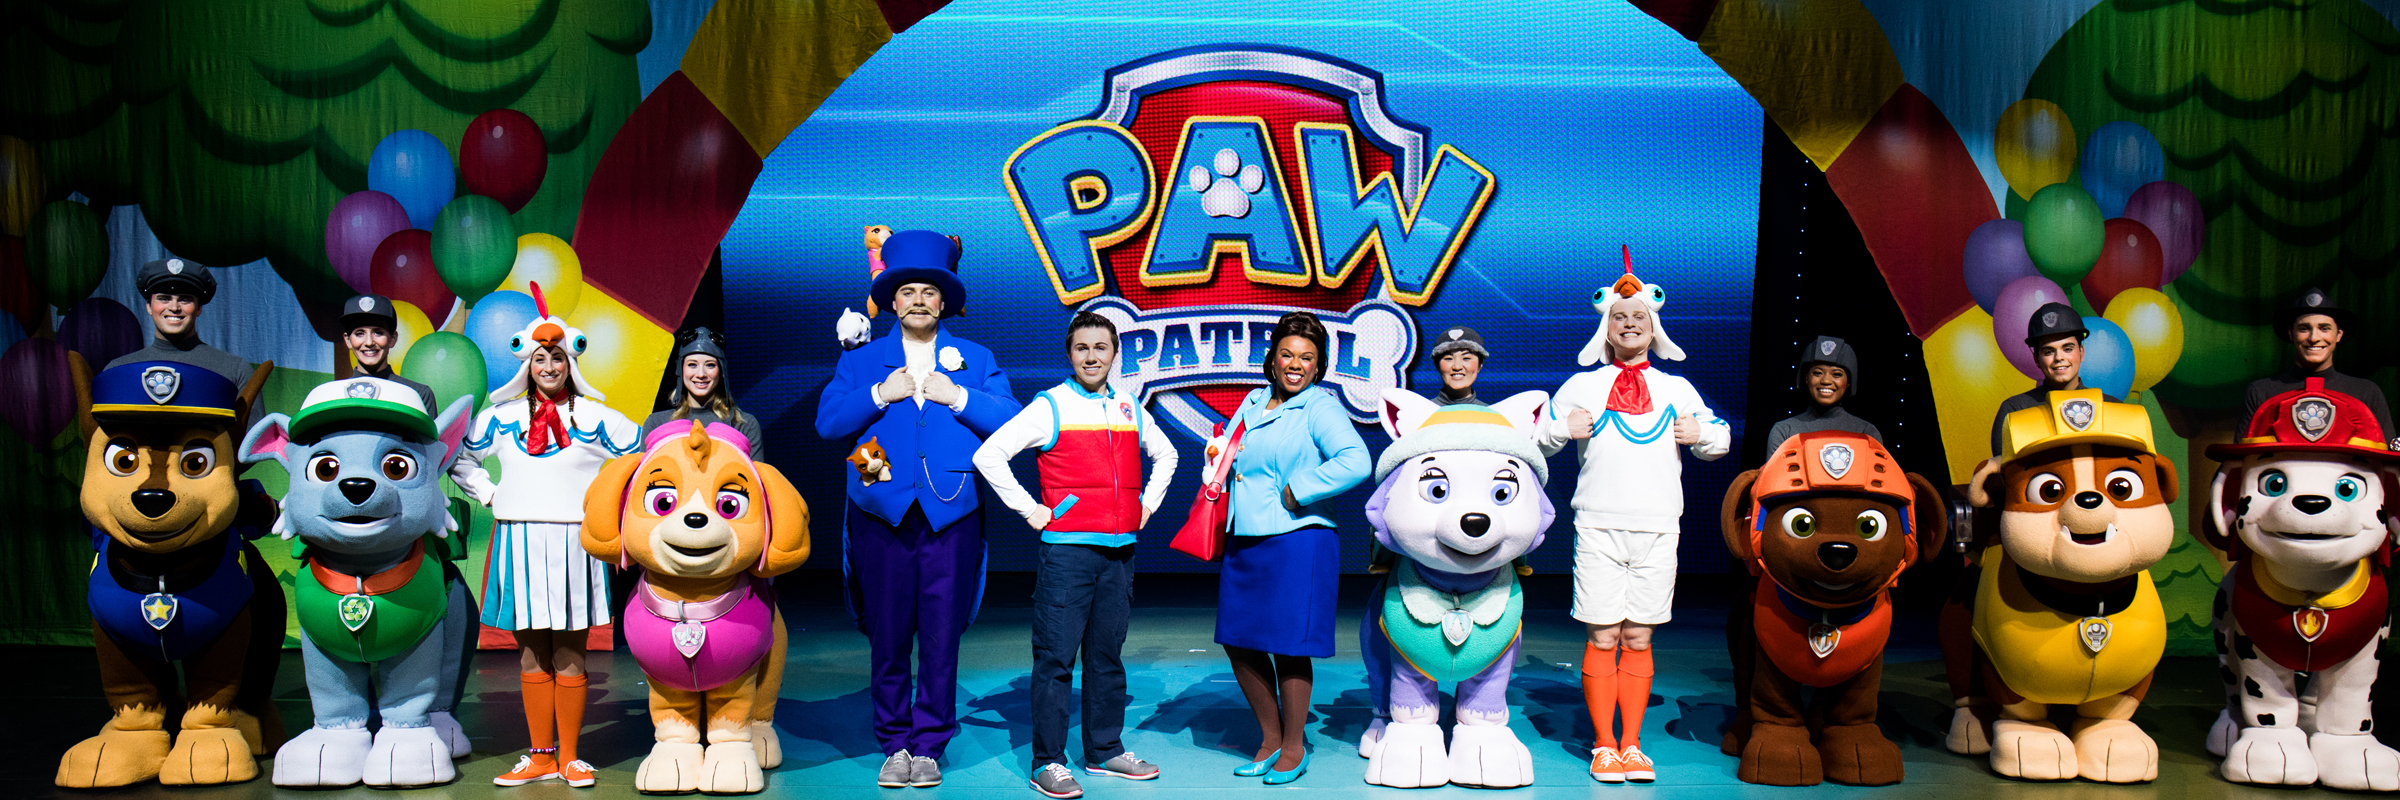 PAW Patrol Live! Race to the Rescue